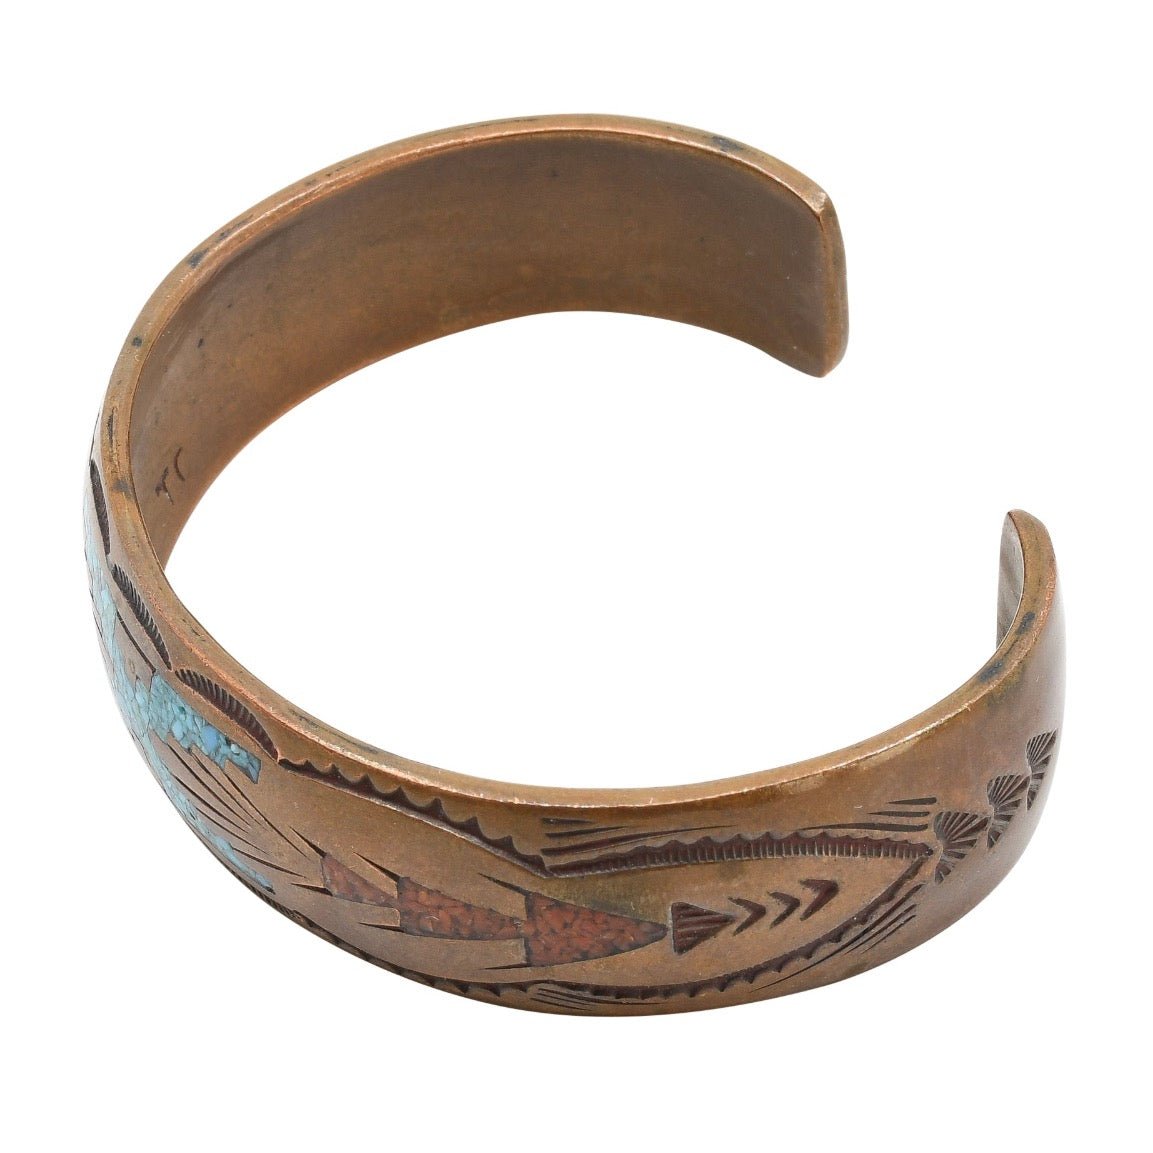 Rare Early Vintage Tommy Singer Chip Inlay Turquoise and Coral Copper Bracelet - Turquoise & Tufa